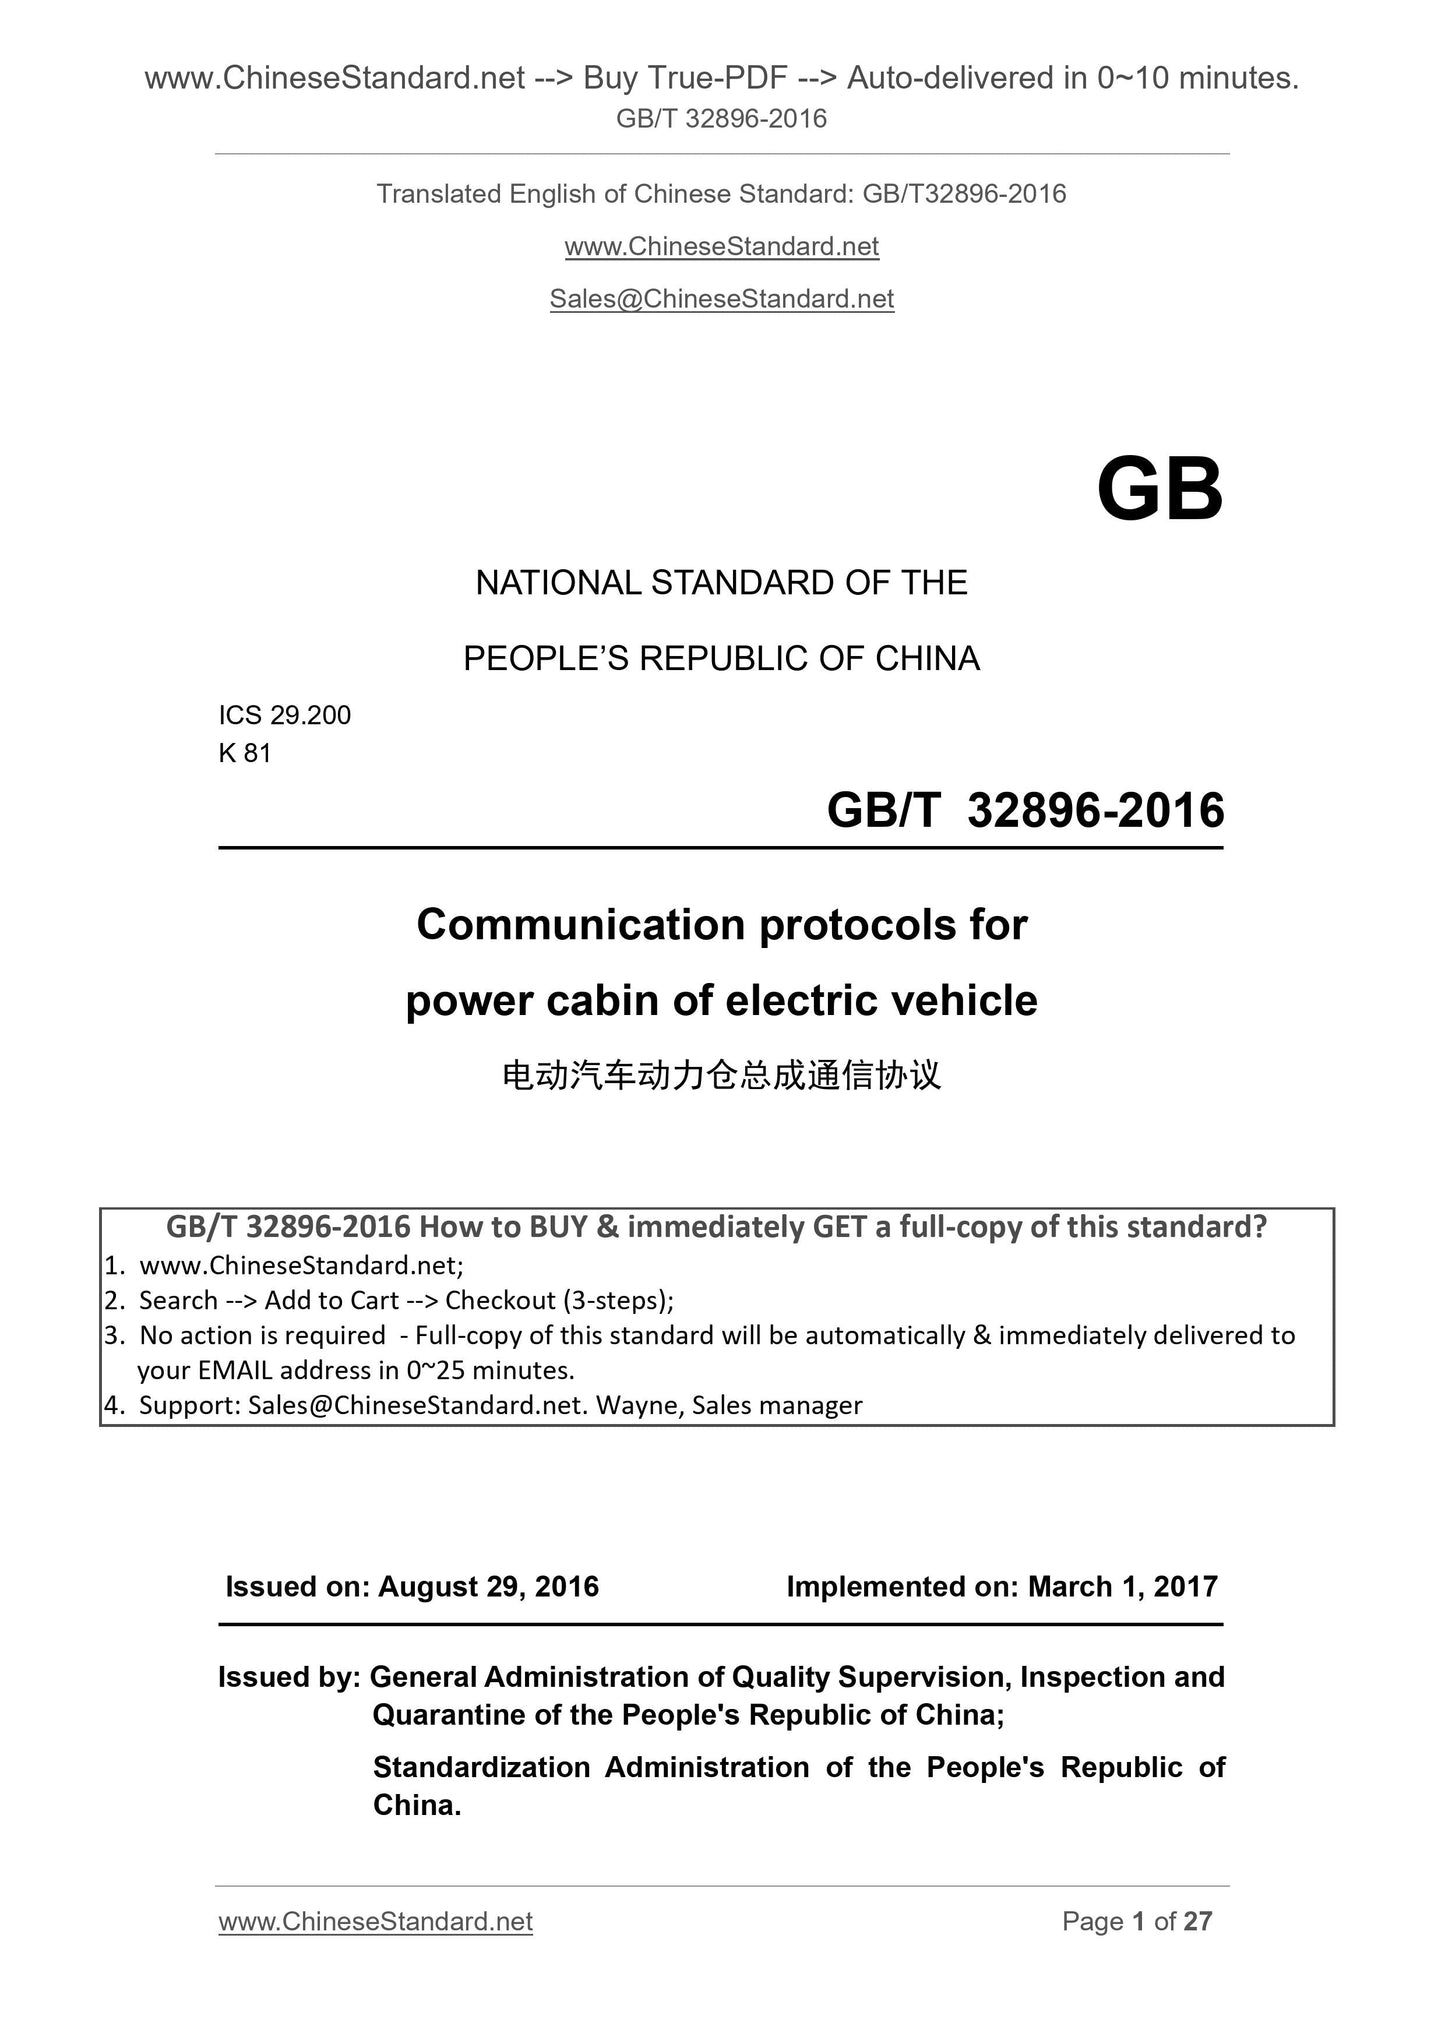 GB/T 32896-2016 Page 1